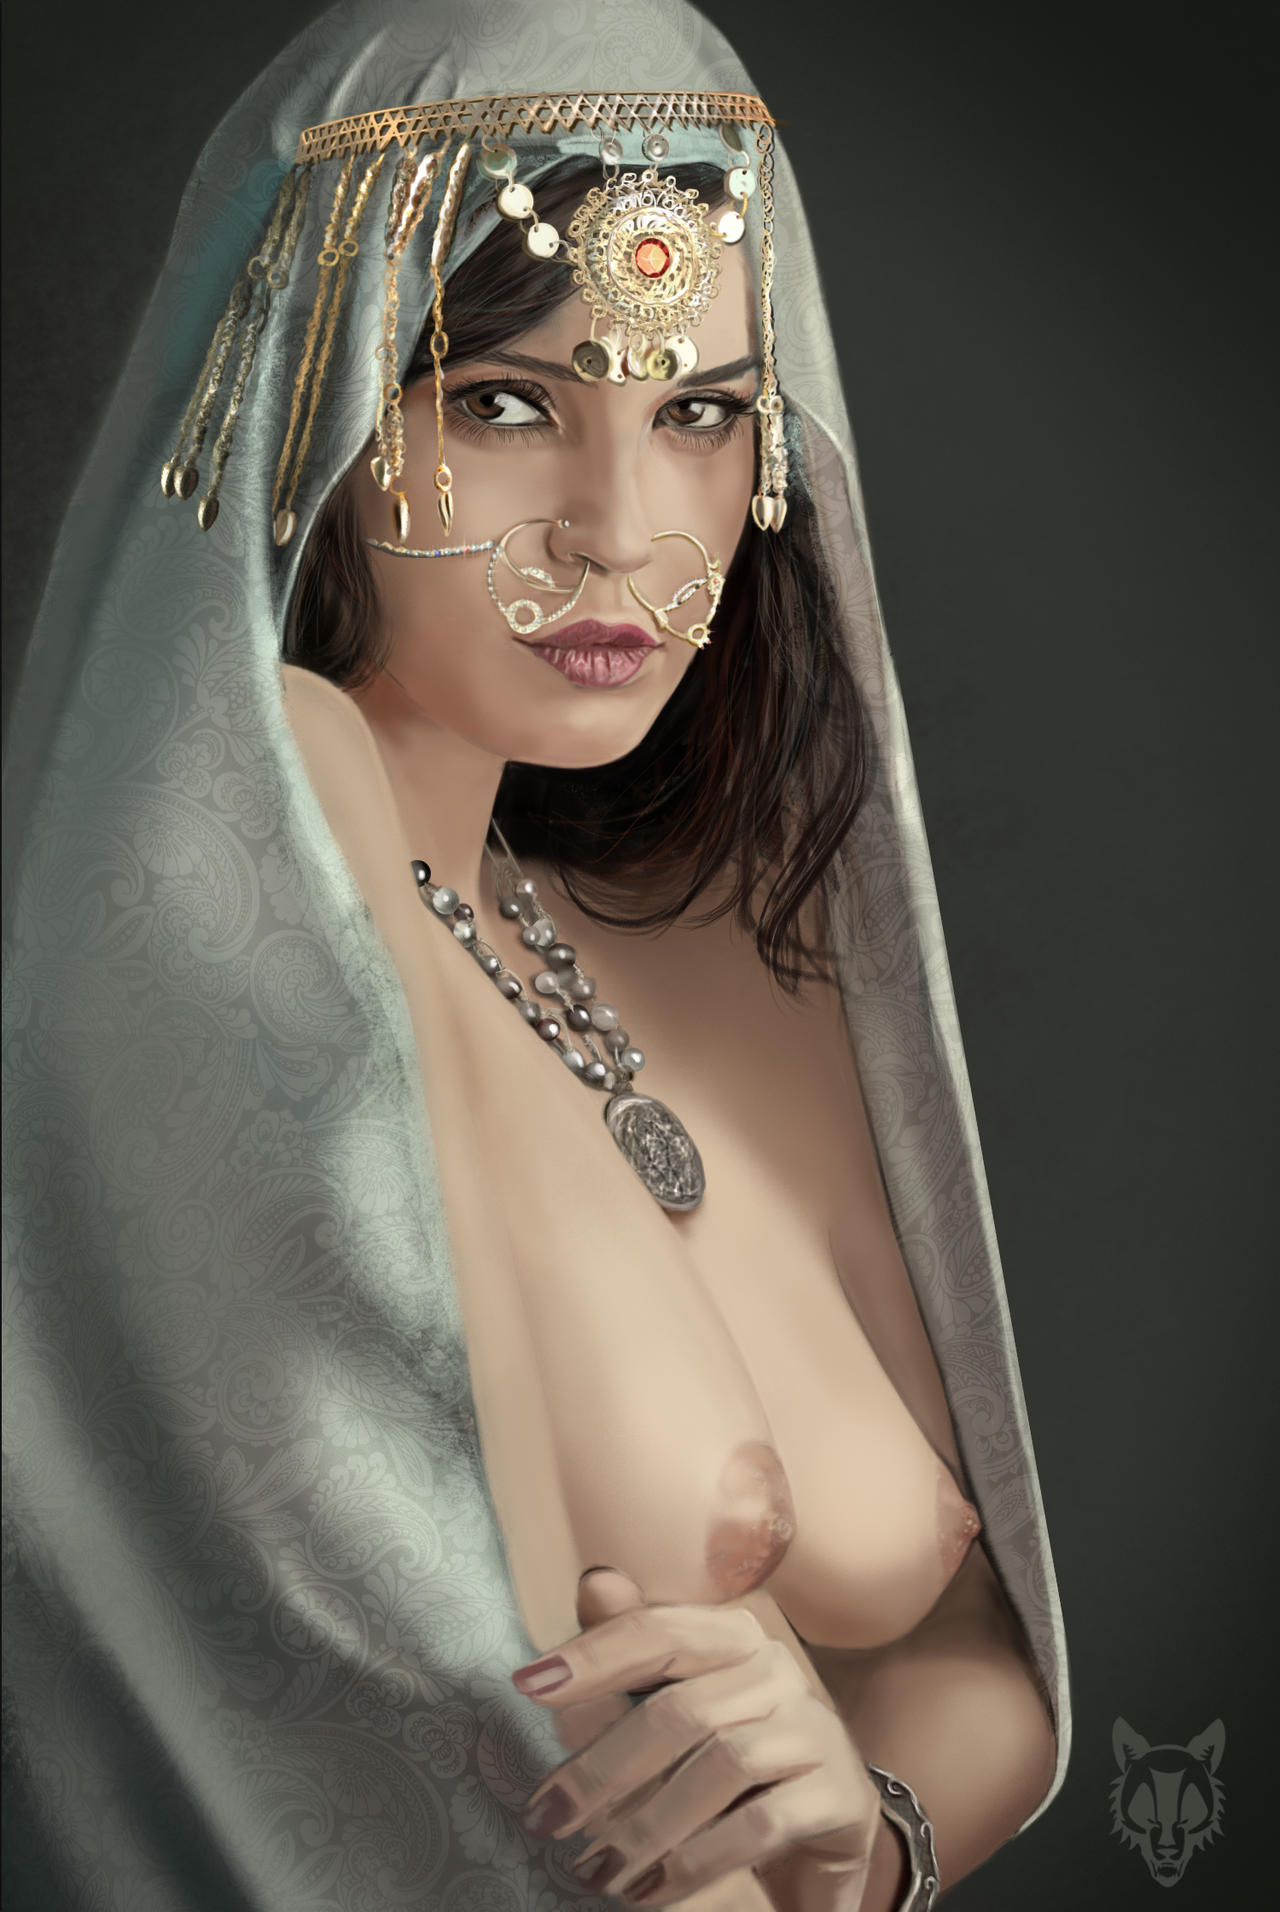 [Image: lady_of_the_harem_by_wolkenfels-d7stk79.jpg]